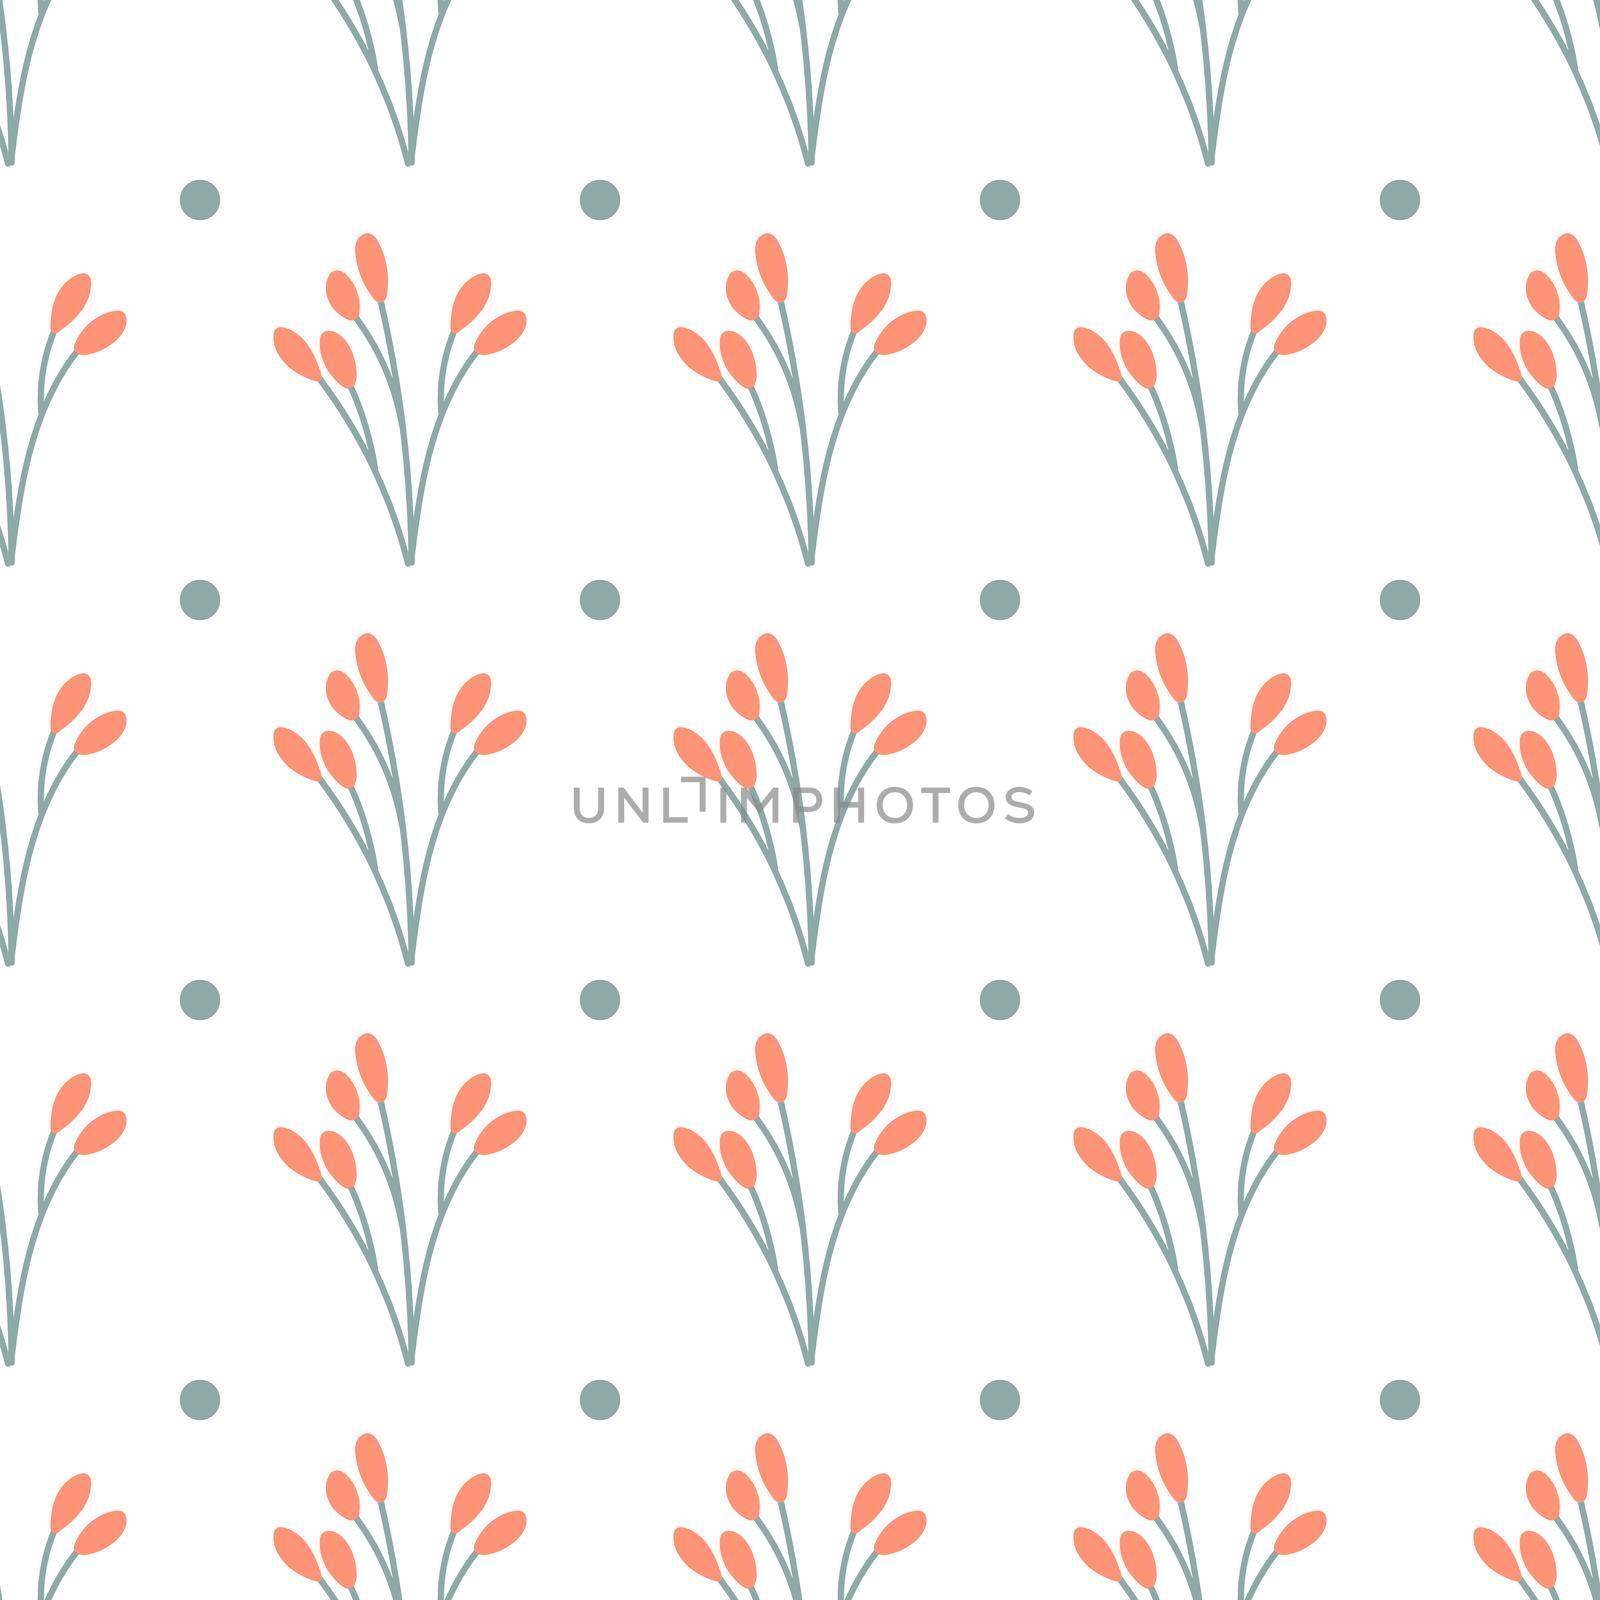 Autumn minimalistic pattern on a white background. Branch with red berries. Seamless pattern for printing, packaging, postcards, textiles.